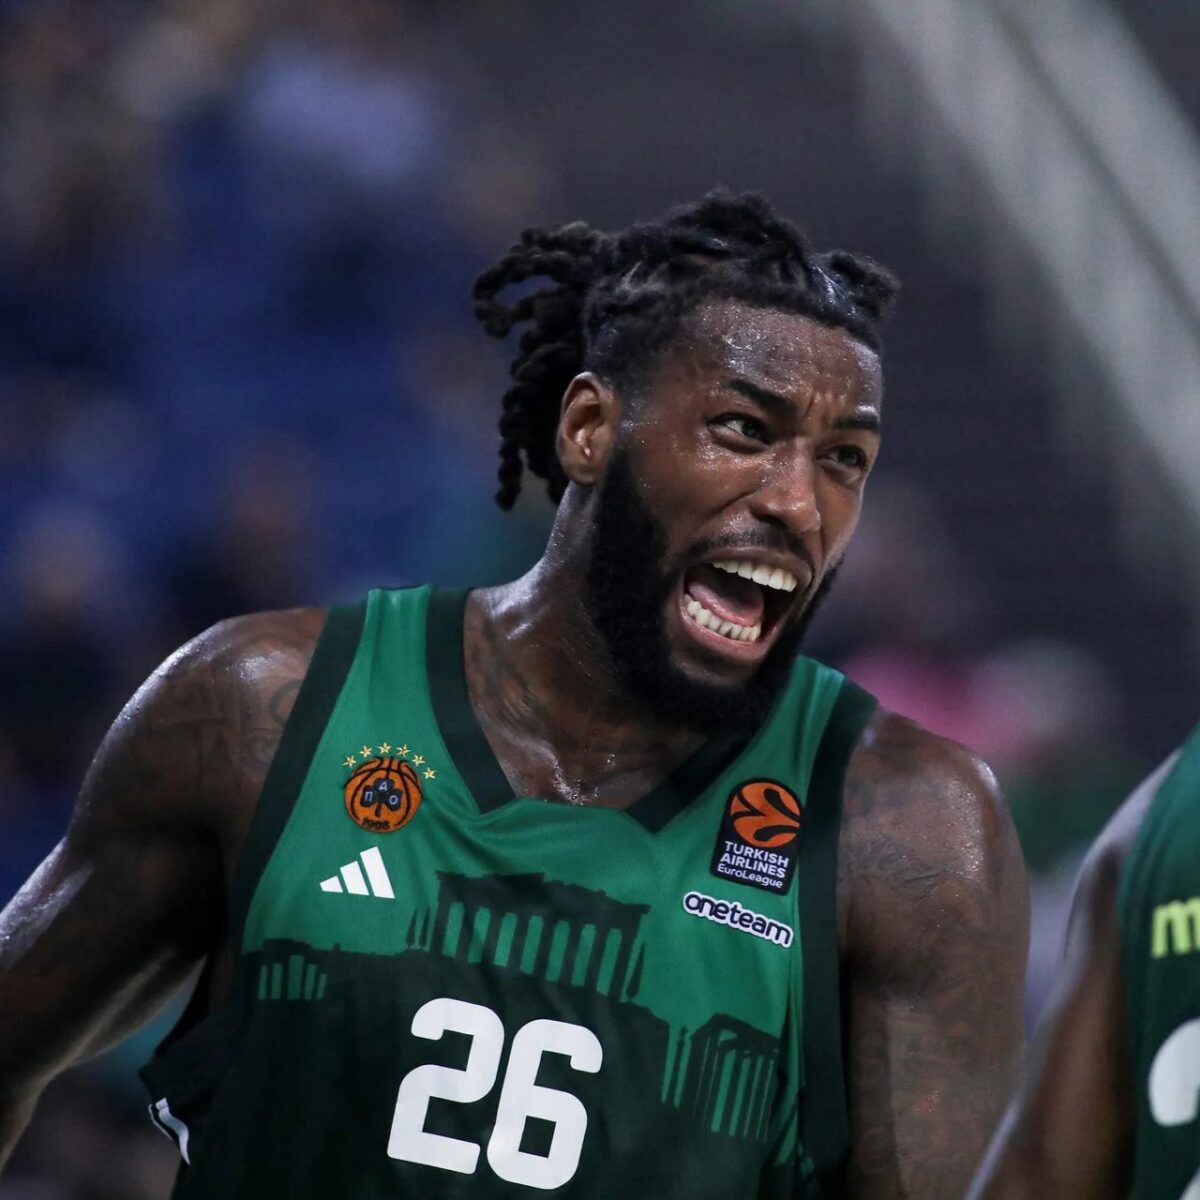 Mathias Lessort is an emotional leader for Panathinaikos but he must be clinical against Maccabi Tel Aviv in Game 4 to save PAO's Euroleague season